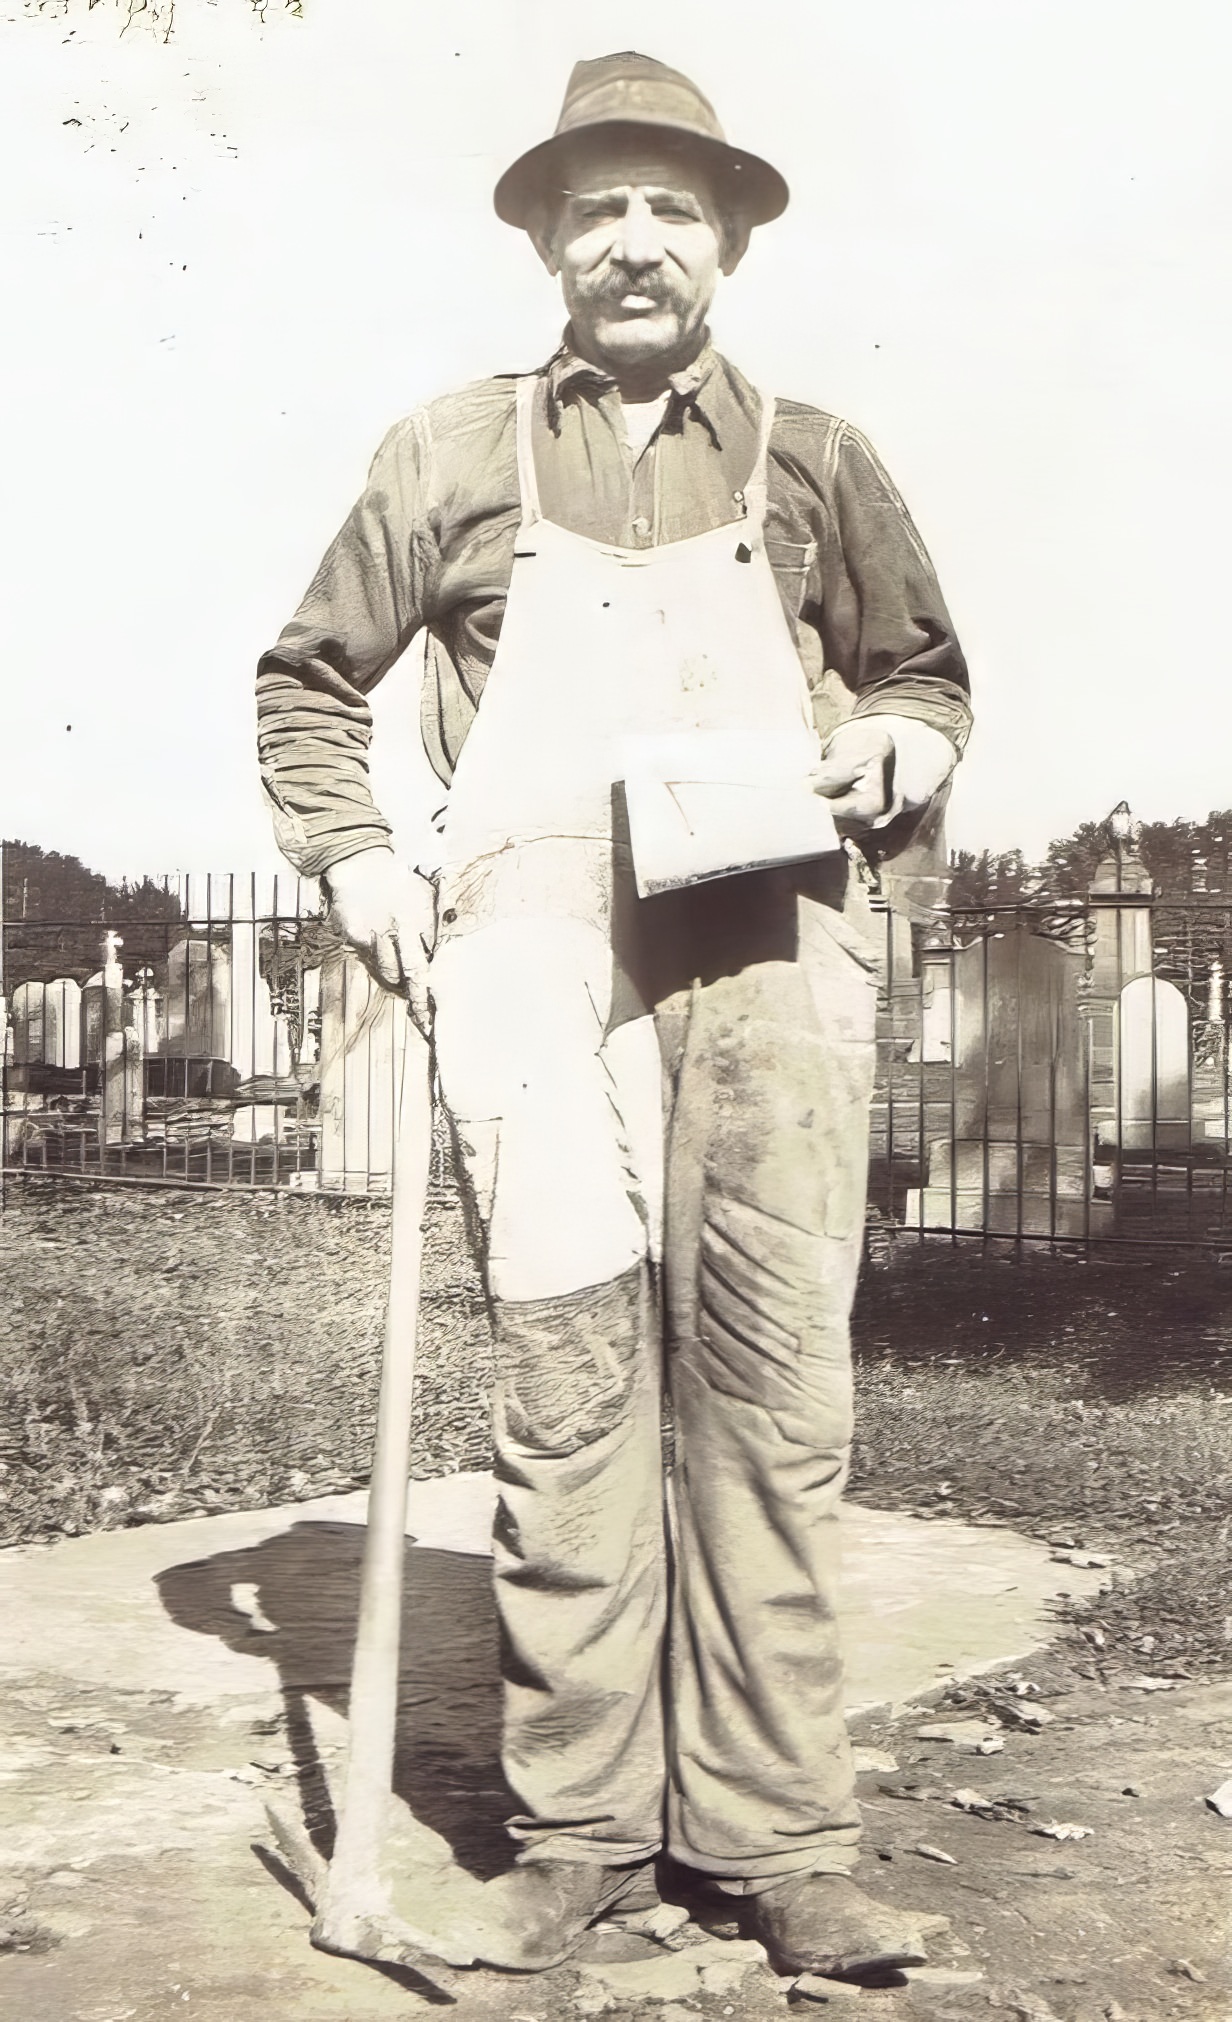 Tony Pacello, a participant in the Liberty Bond campaign to support the Allies in World War I, standing near St. Patrick's Cemetery, Geneva, circa 1917